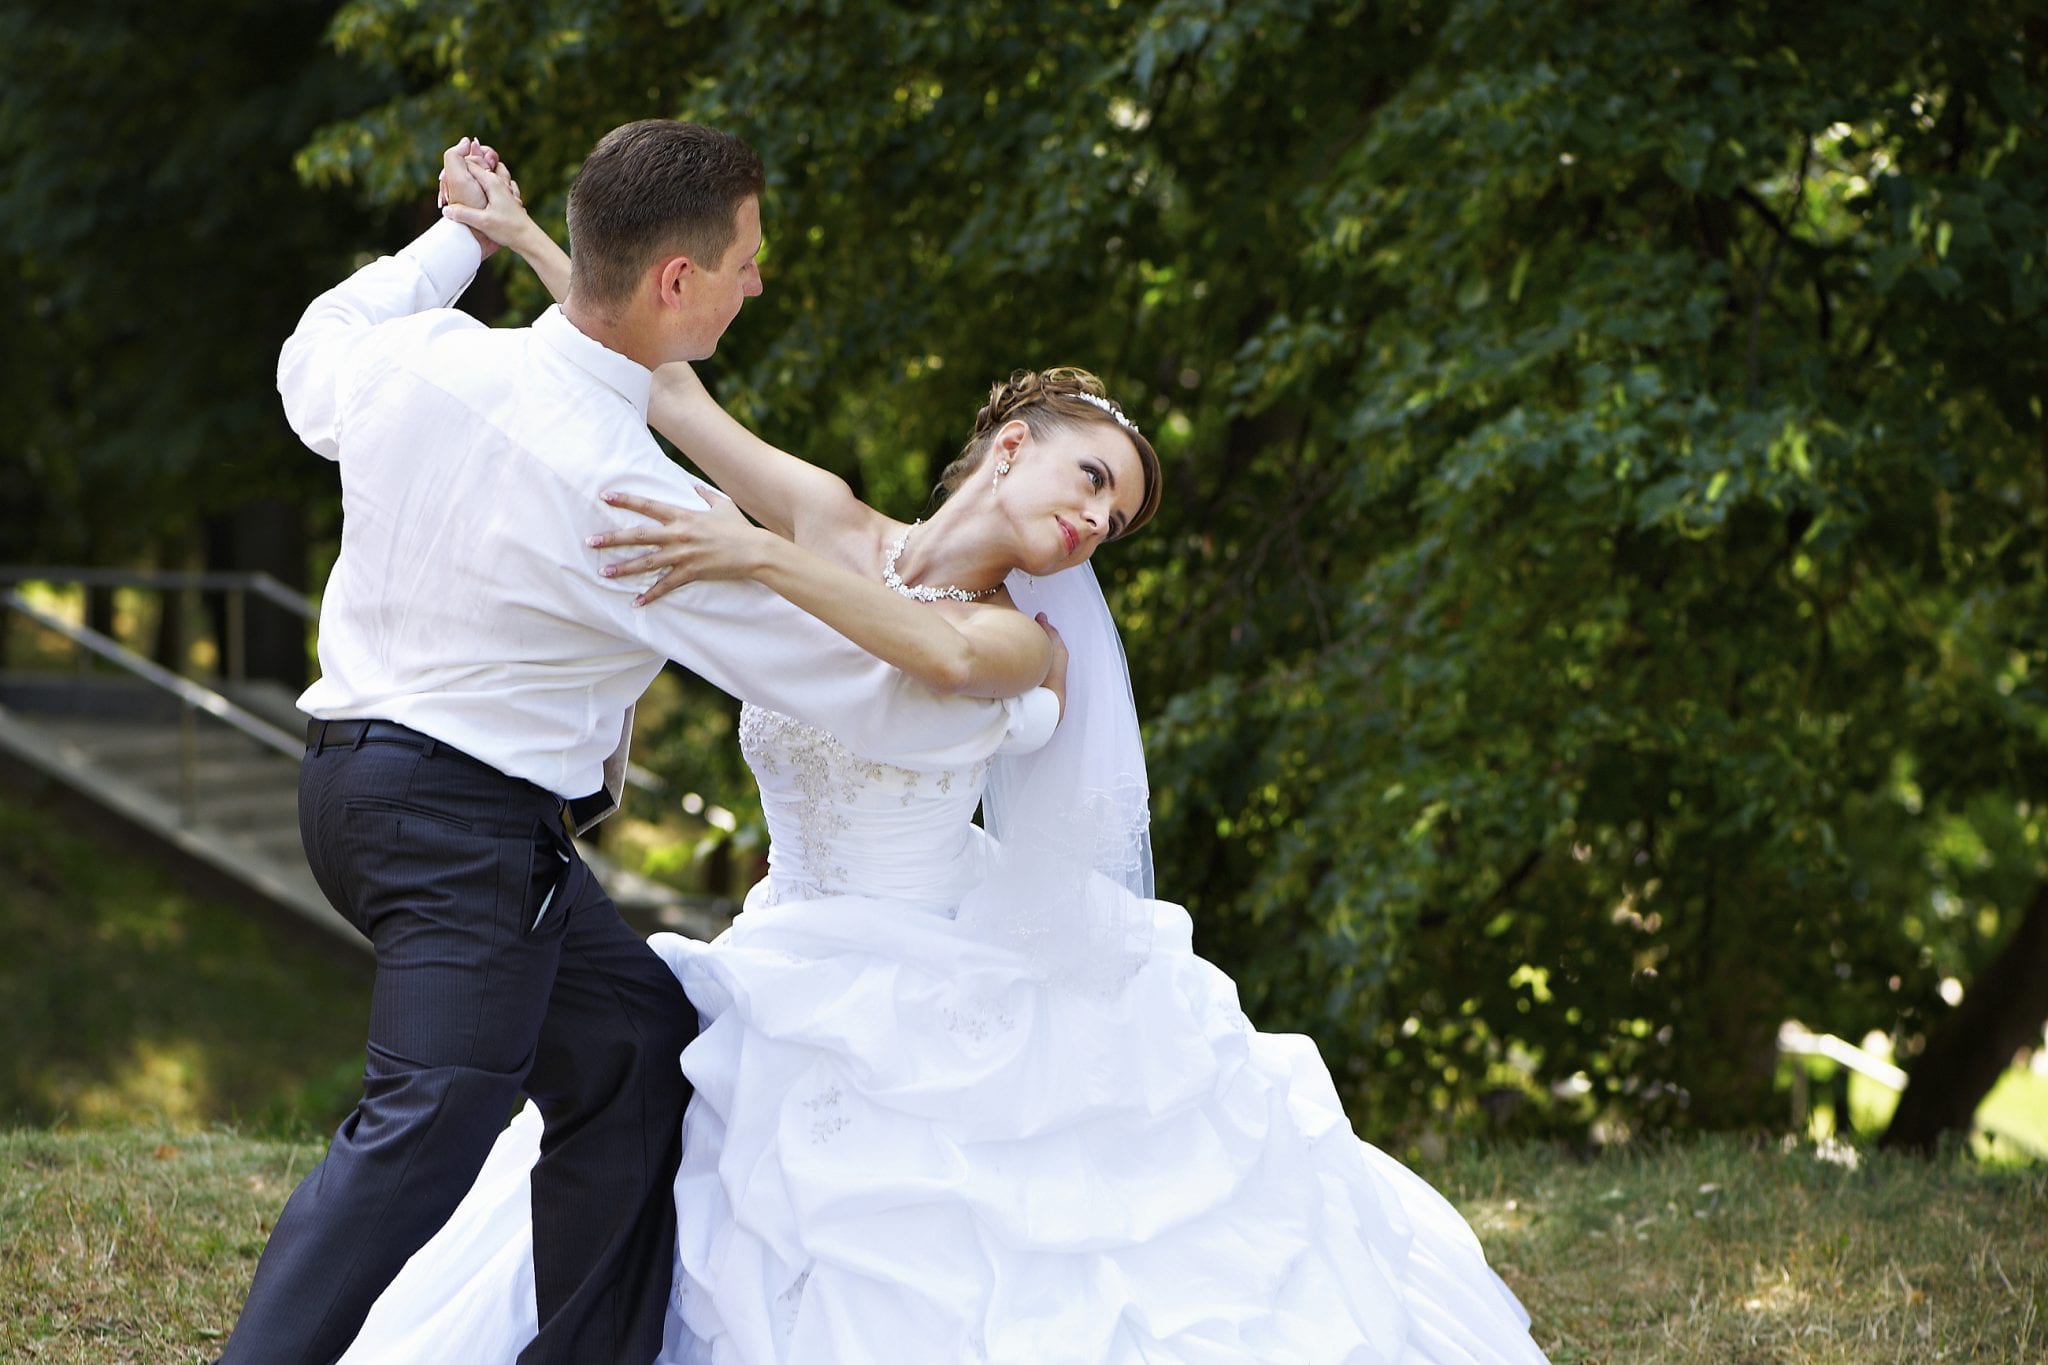 Selfish Bride Kicks Her Friends Out of Her Wedding after Their Dance!